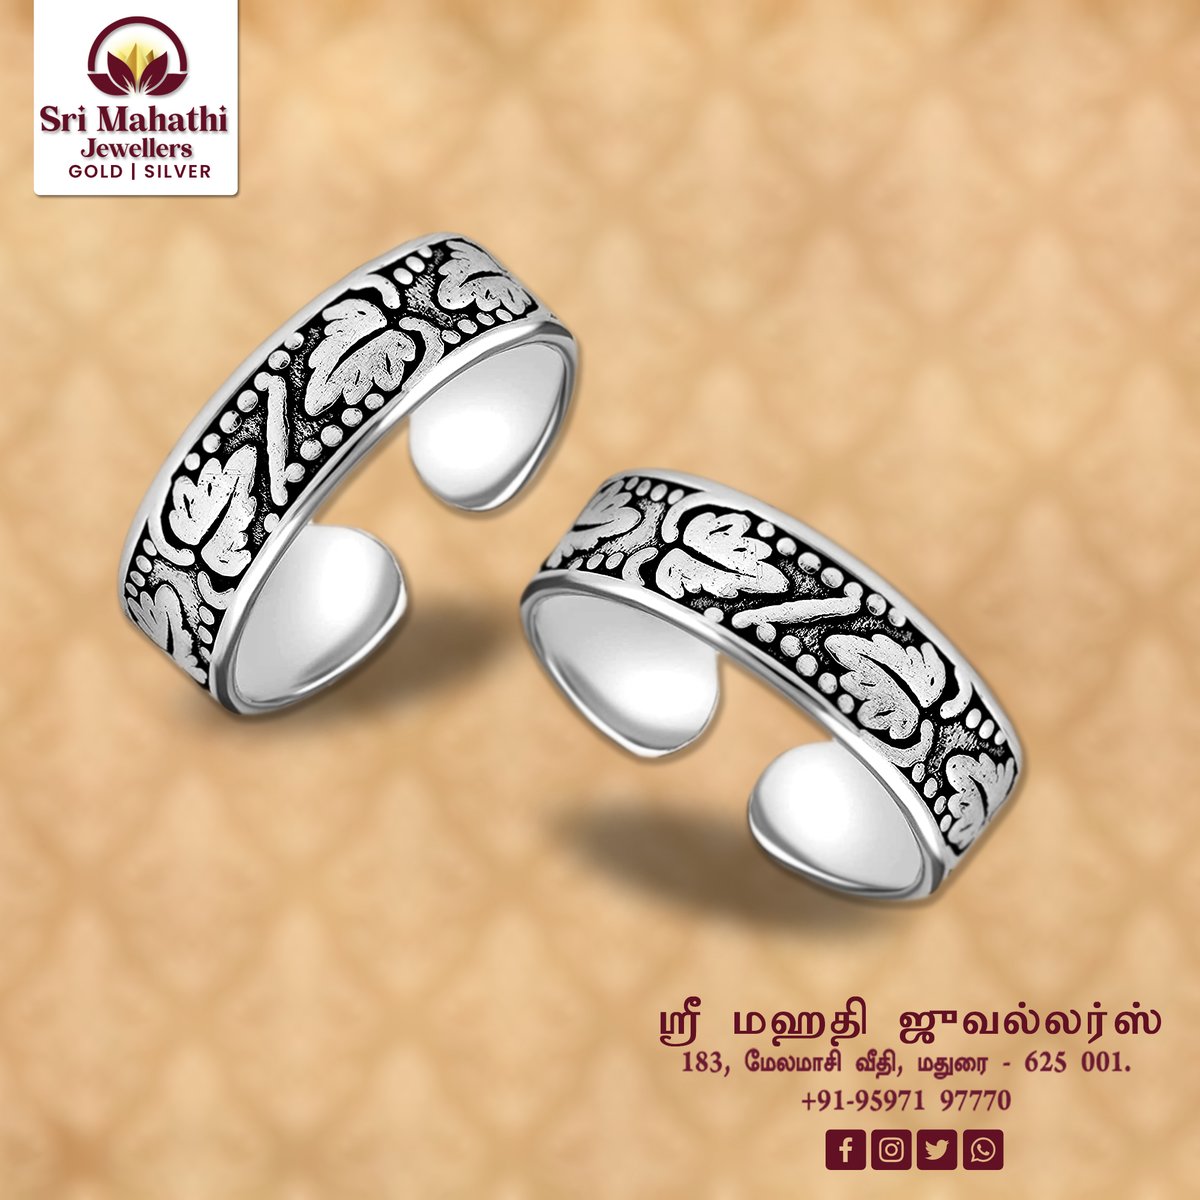 925 Sterling-Silver Jewellery Antique Oxidized Fancy Design Toe-Ring from the house of Sri Mahathi Jewellers - Madurai.

#silvertoering #toering #silvertoeringcollections #latestsilvertoeringcollections #SriMahathiJewellers #SriMahathiJewellersMadurai